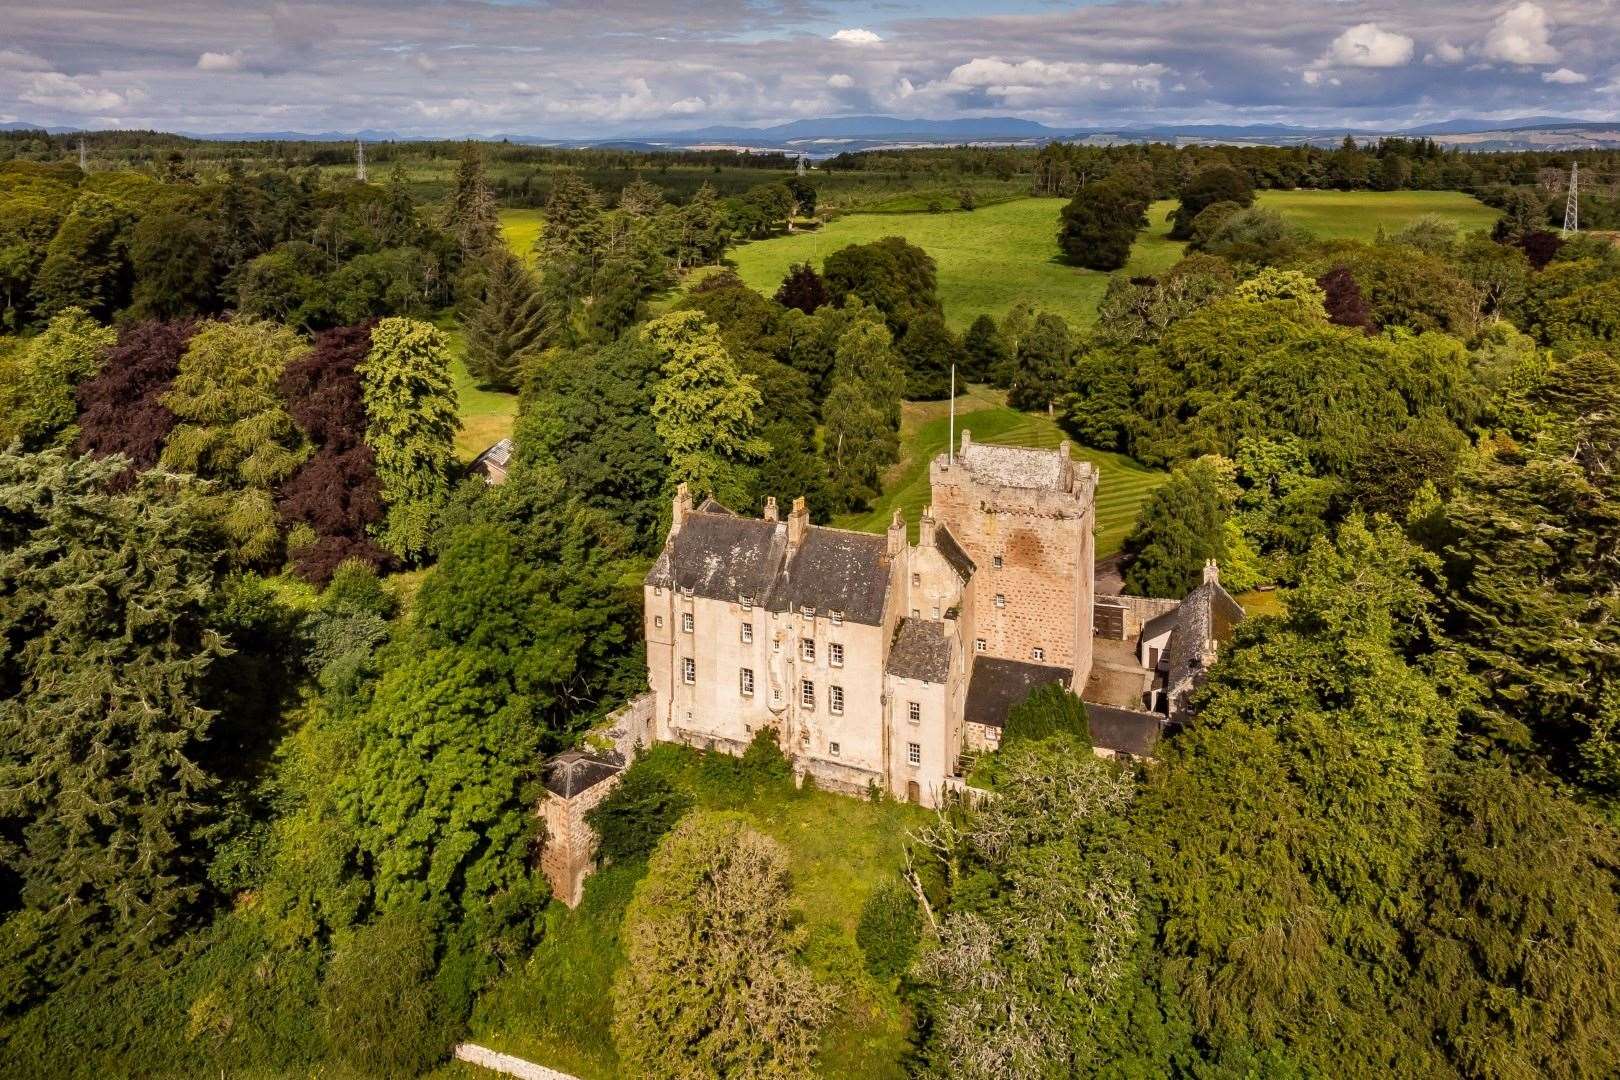 Kilravock Castle was occupied by the same family for centuries.